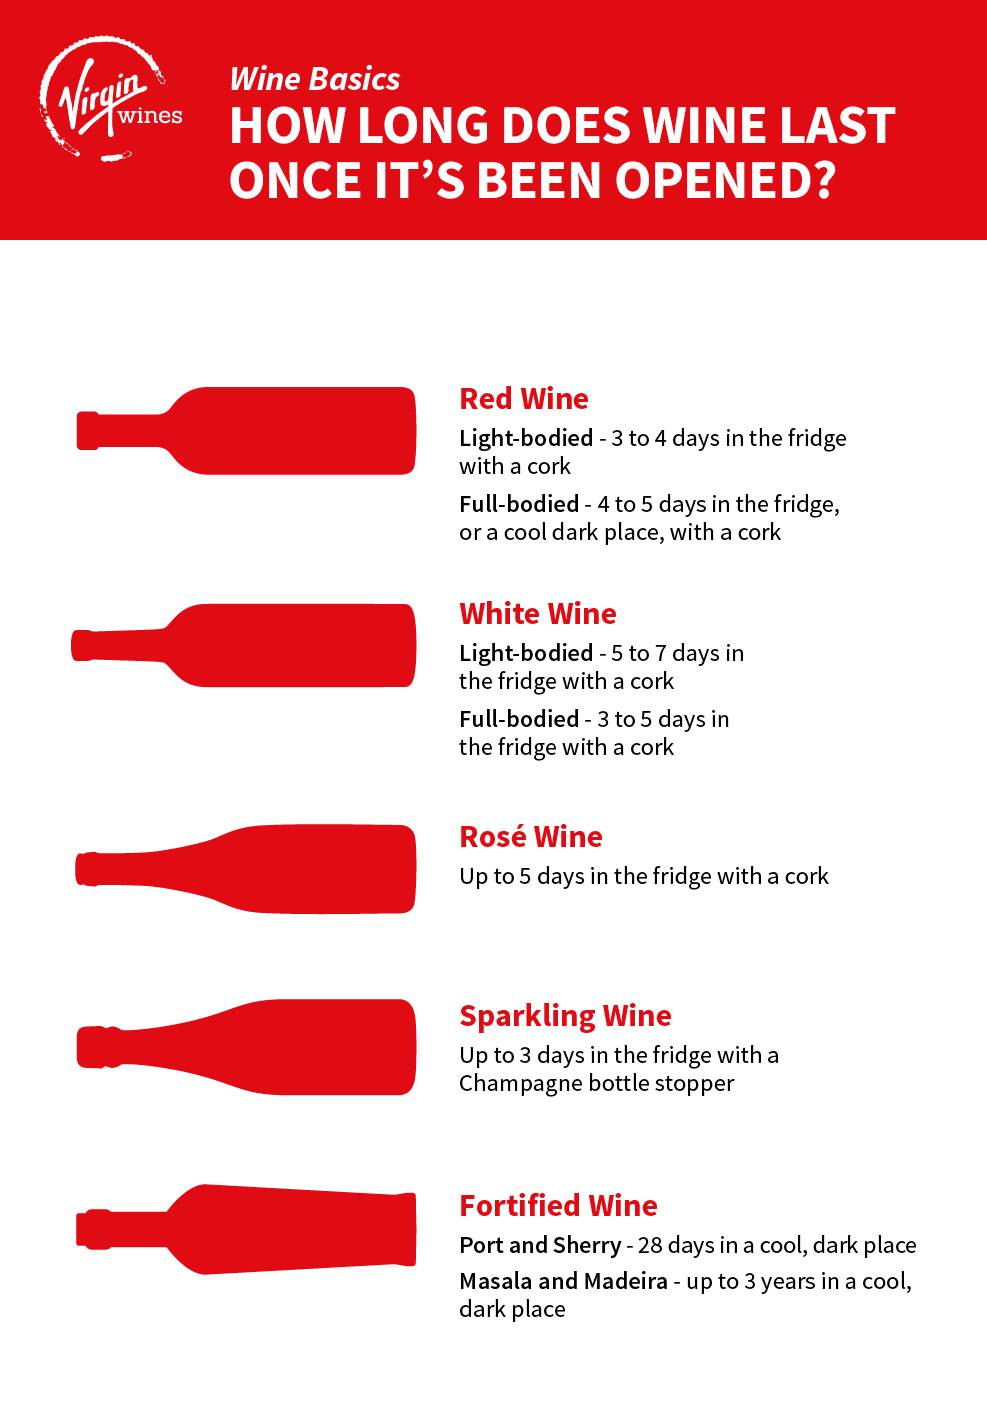 Infographic by Virgin Wines explaining how long each style of wine lasts once it's been opened